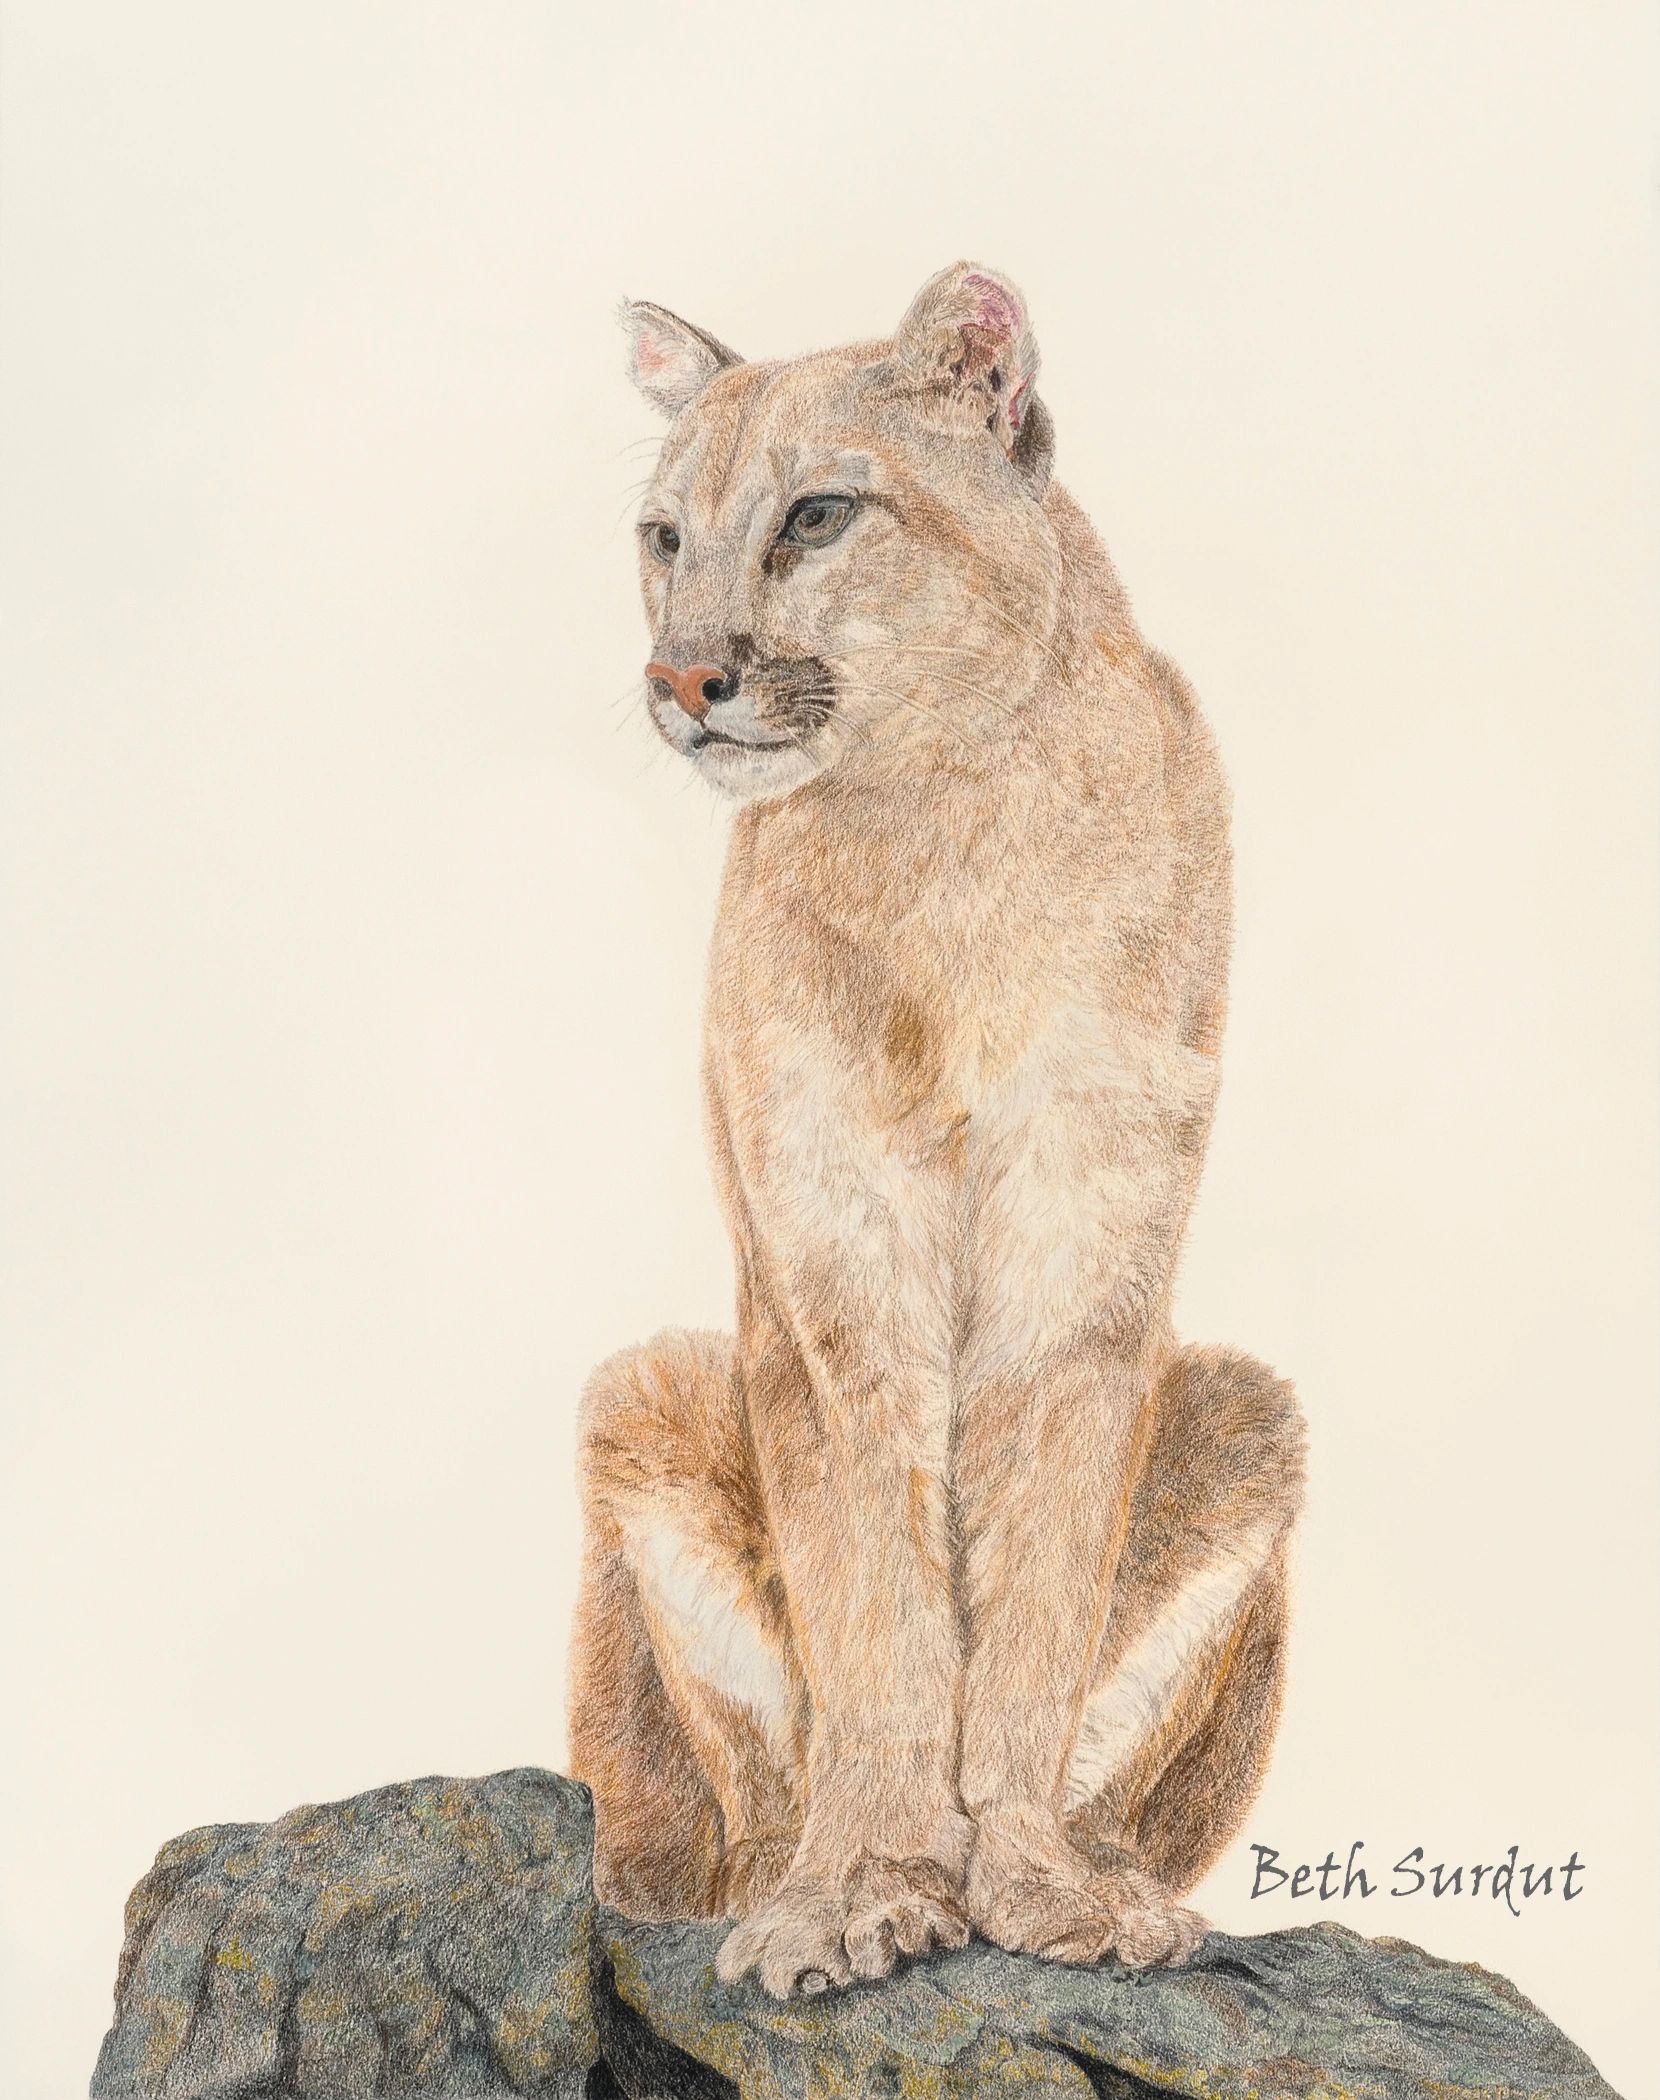 Moutain lioness drawing titled You Should Be So Lucky by Beth Surdut